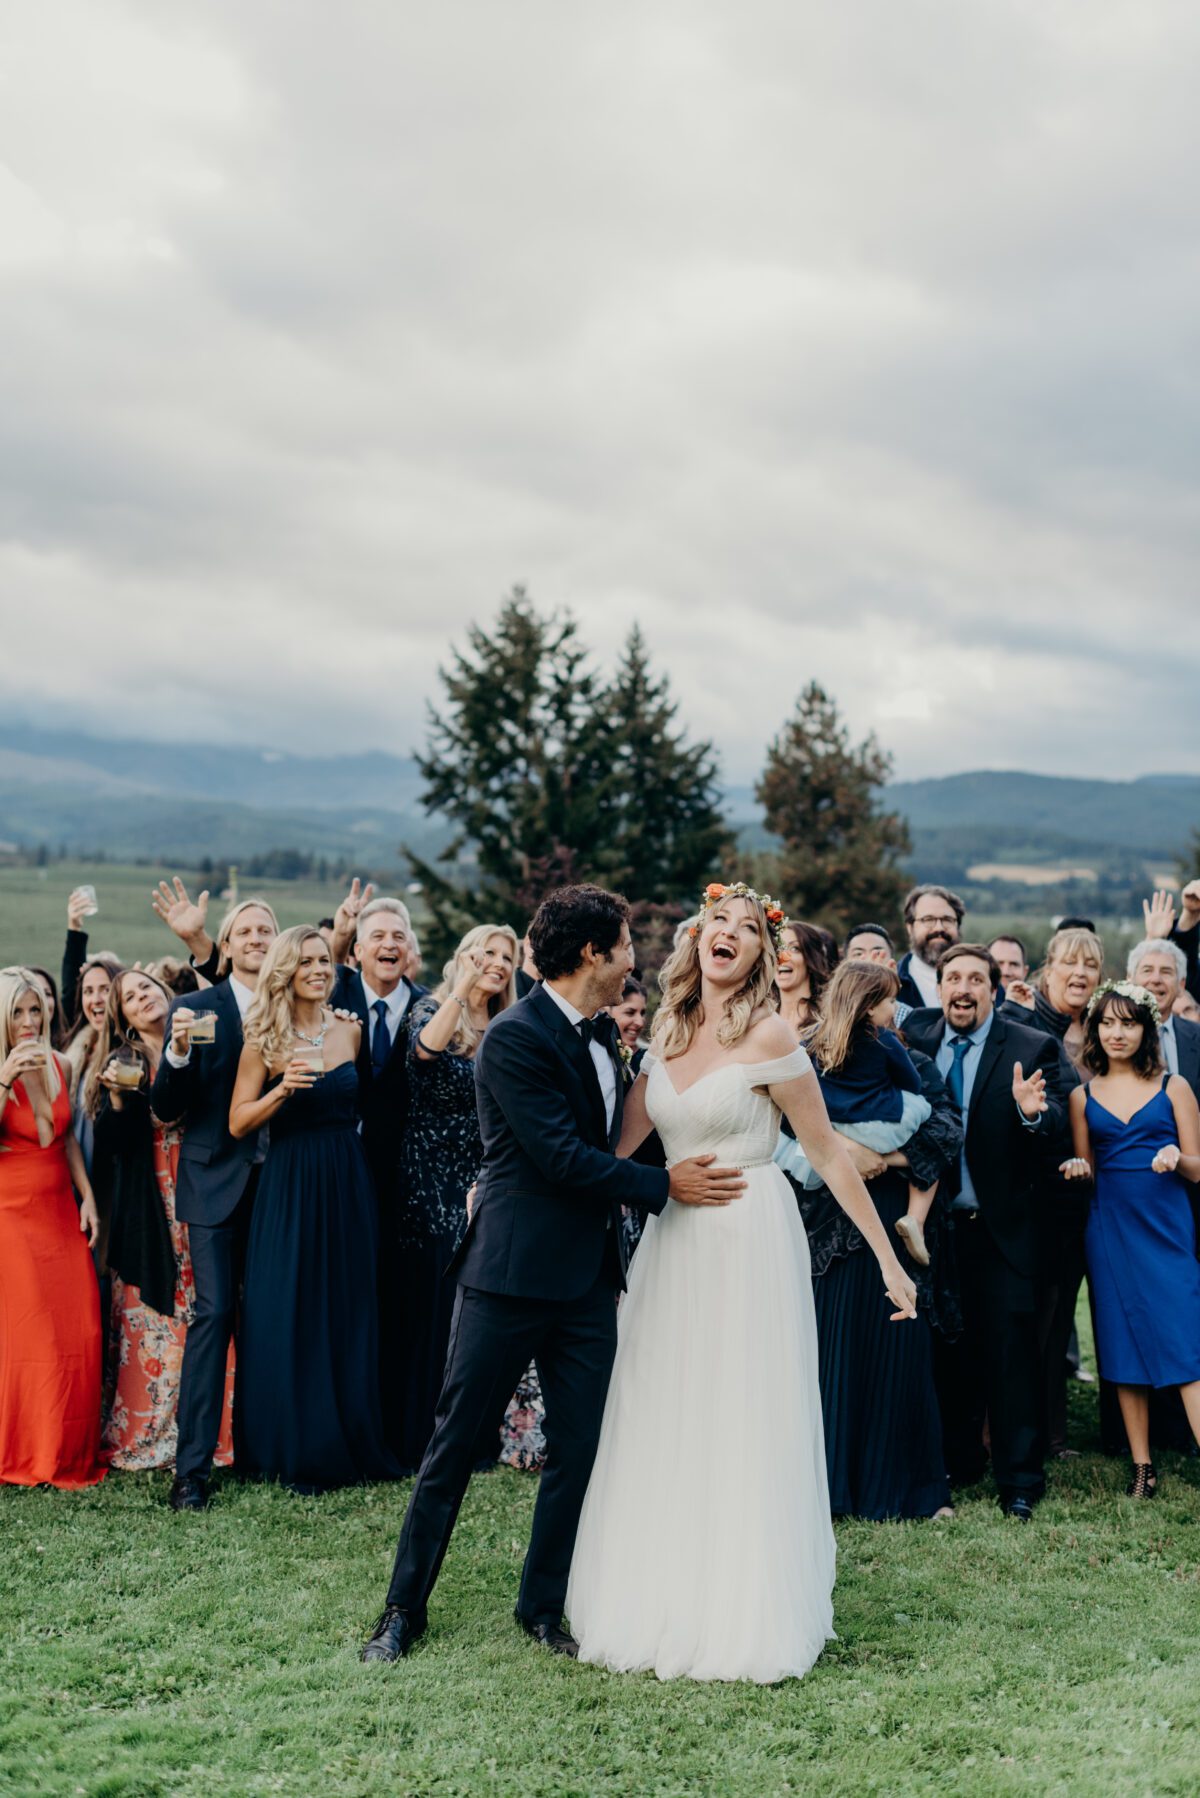 A fun and expressive portrait of a bride and groom and their full guest list